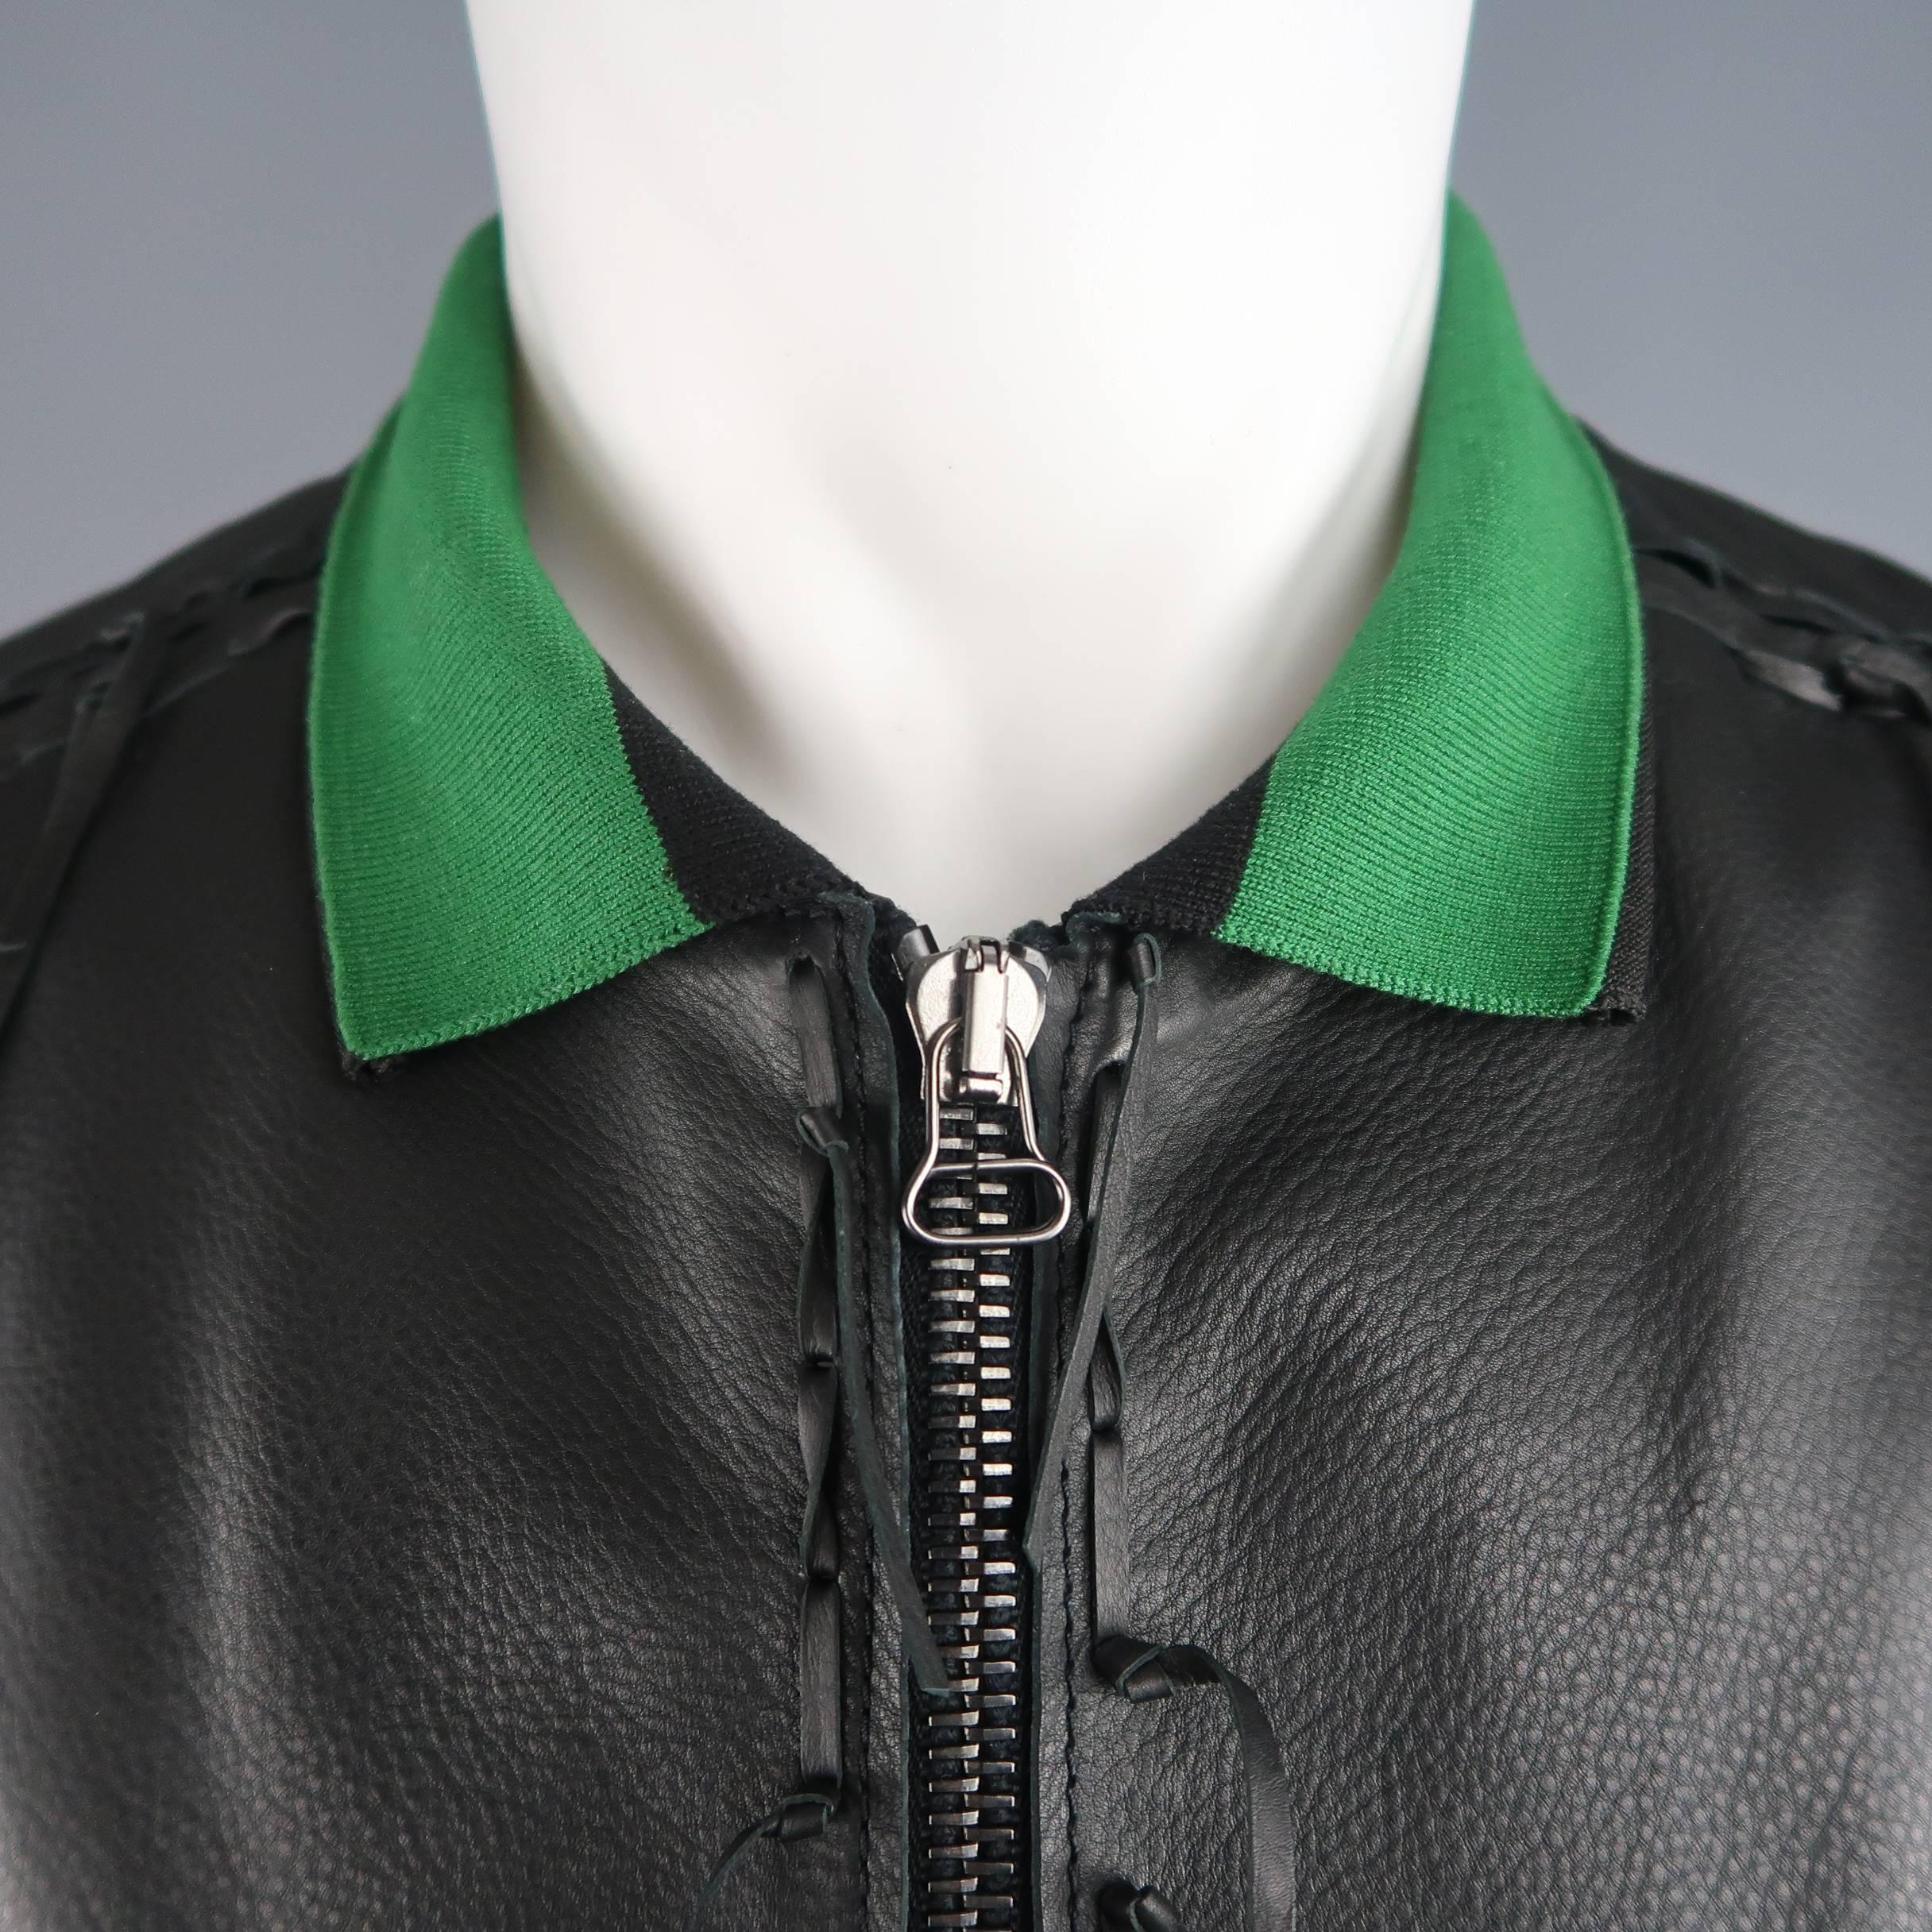 LANVIN tailored bomber jacket comes in soft calf leather and features a green and black ribbed knit collar, gunmetal zip front, ribbed cuffs, patch flap snap breast pockets, and woven fringe trim throughout. Made in Italy.
Good Pre-Owned